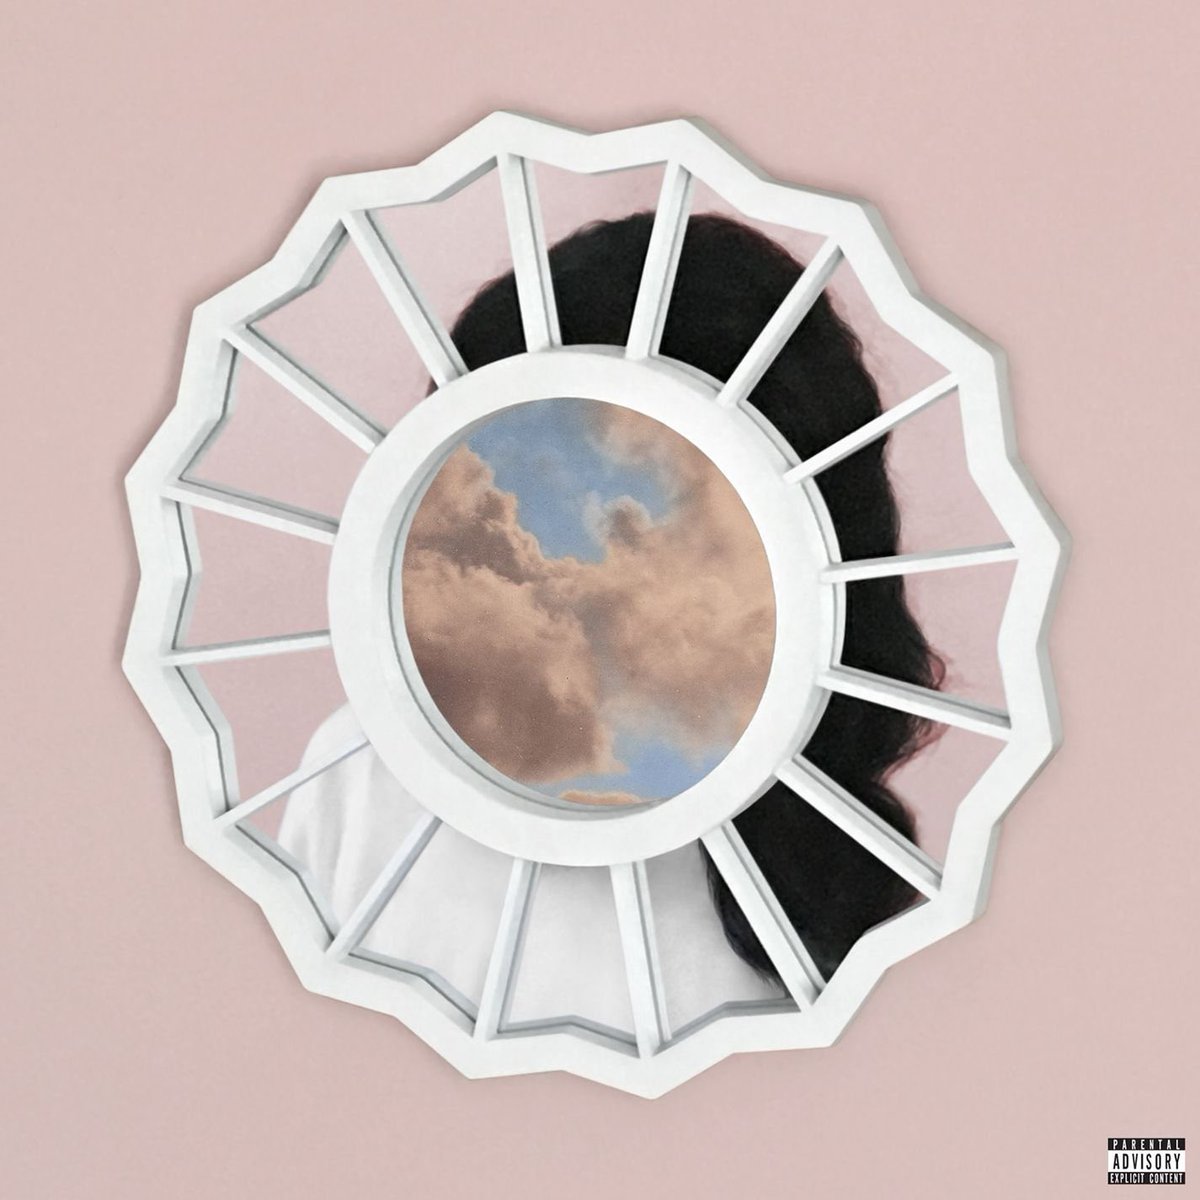 In #4 comes “The Divine Feminine”. This might be the most beautiful love album to grace Earth. It is romantic but still somehow captures the ups and downs of relationships. The ending to cinderella is the 8th wonder of the world. Ladies love “skin” ;)10/10Fav Track: Cinderella